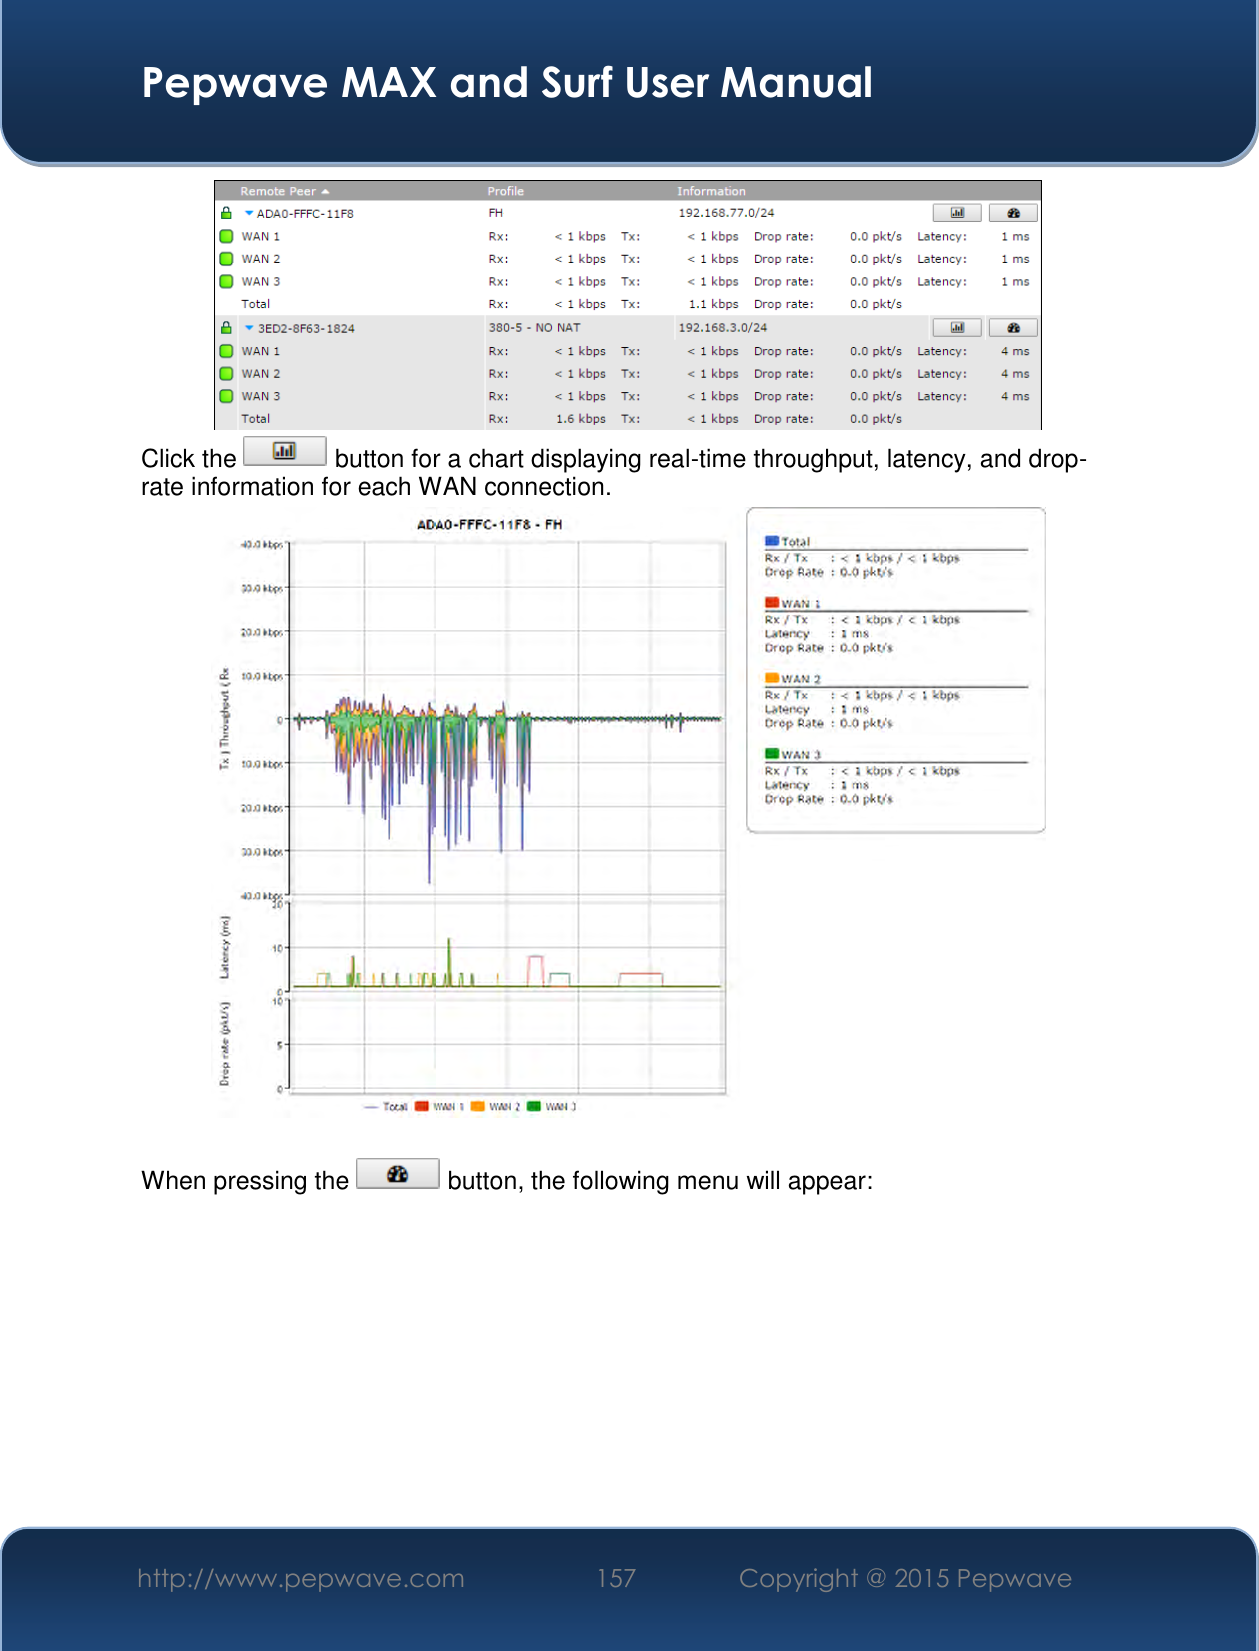  Pepwave MAX and Surf User Manual http://www.pepwave.com 157   Copyright @ 2015 Pepwave    Click the   button for a chart displaying real-time throughput, latency, and drop-rate information for each WAN connection.   When pressing the   button, the following menu will appear:  